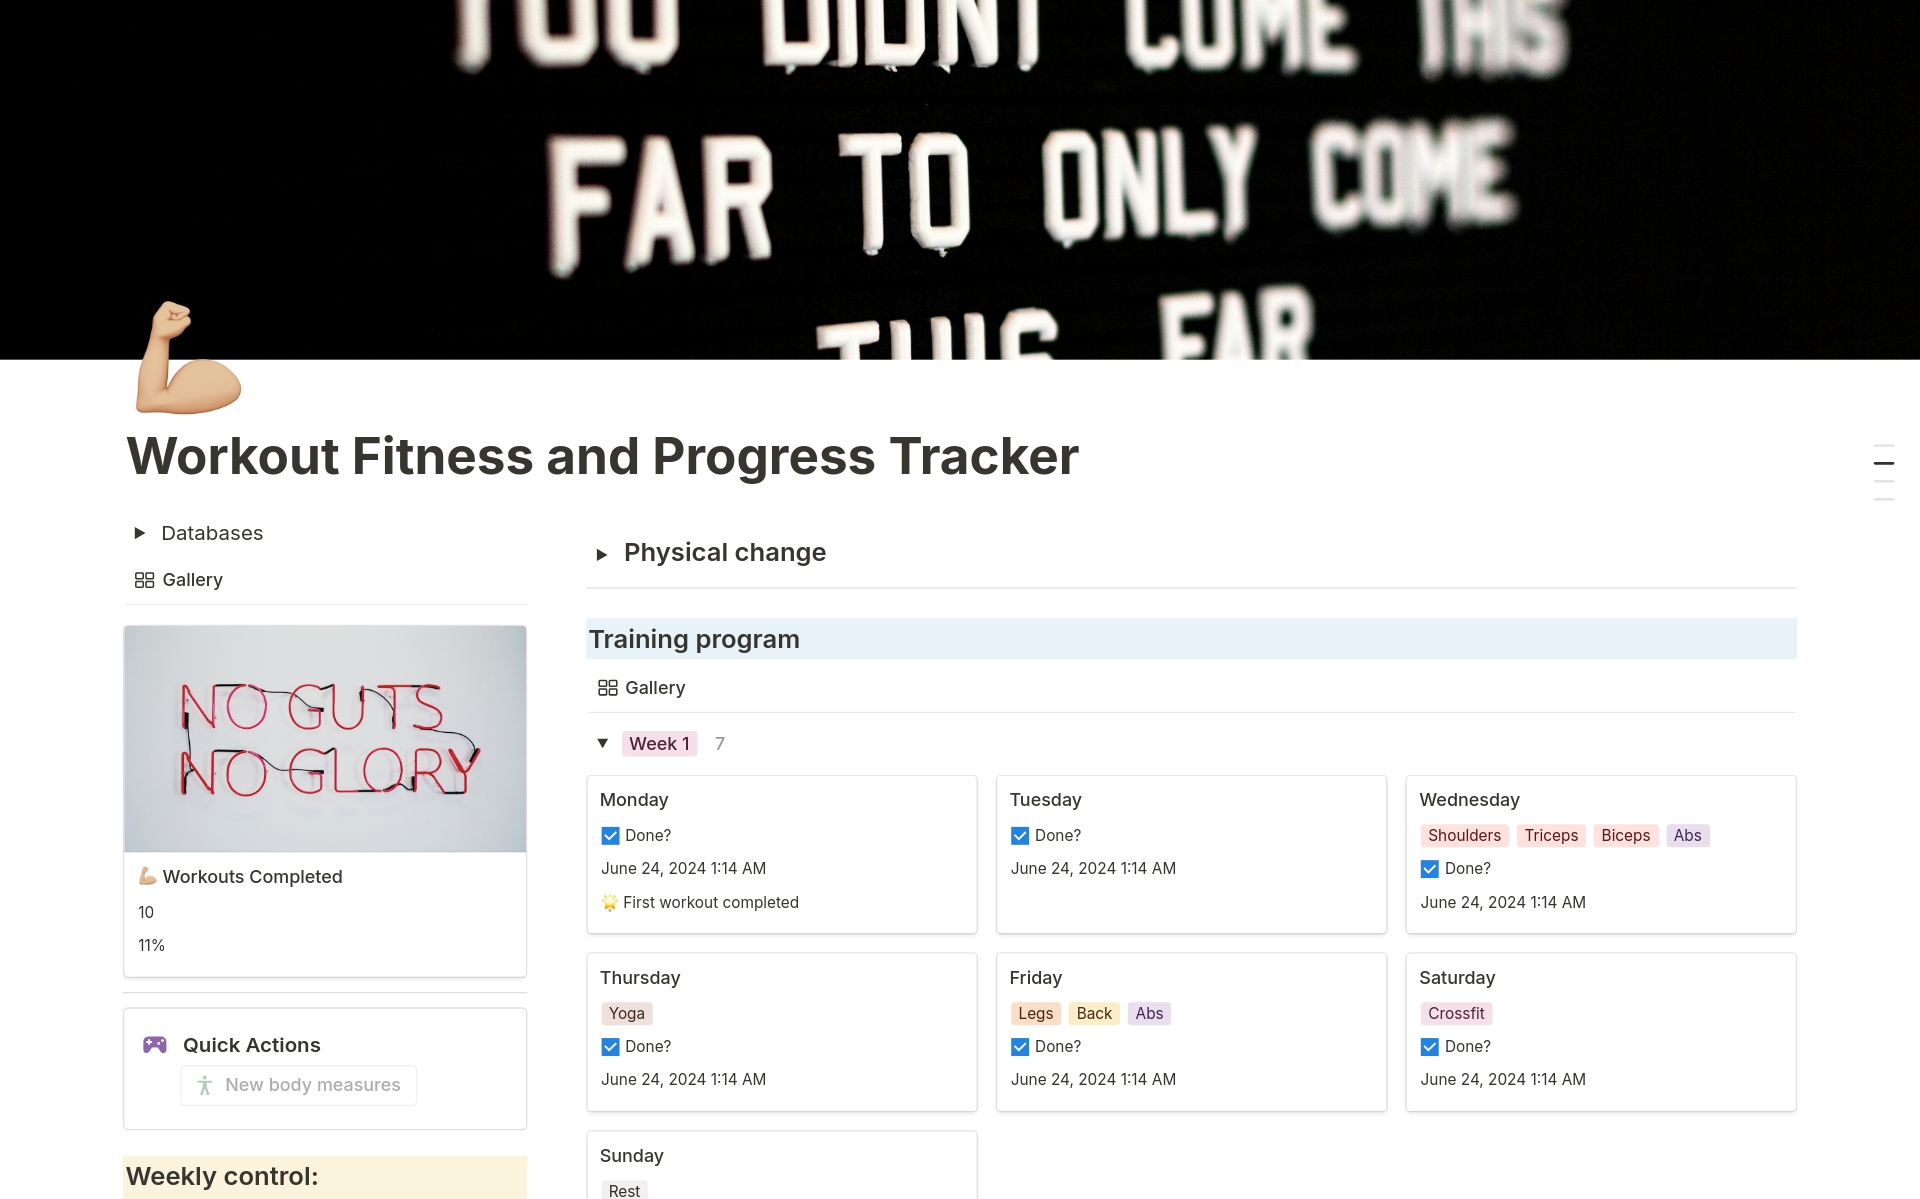 A comprehensive Fitness Tracking Template to monitor workouts, track body measurements, log milestones, and visualize your fitness progress effortlessly. Perfect for all fitness levels!